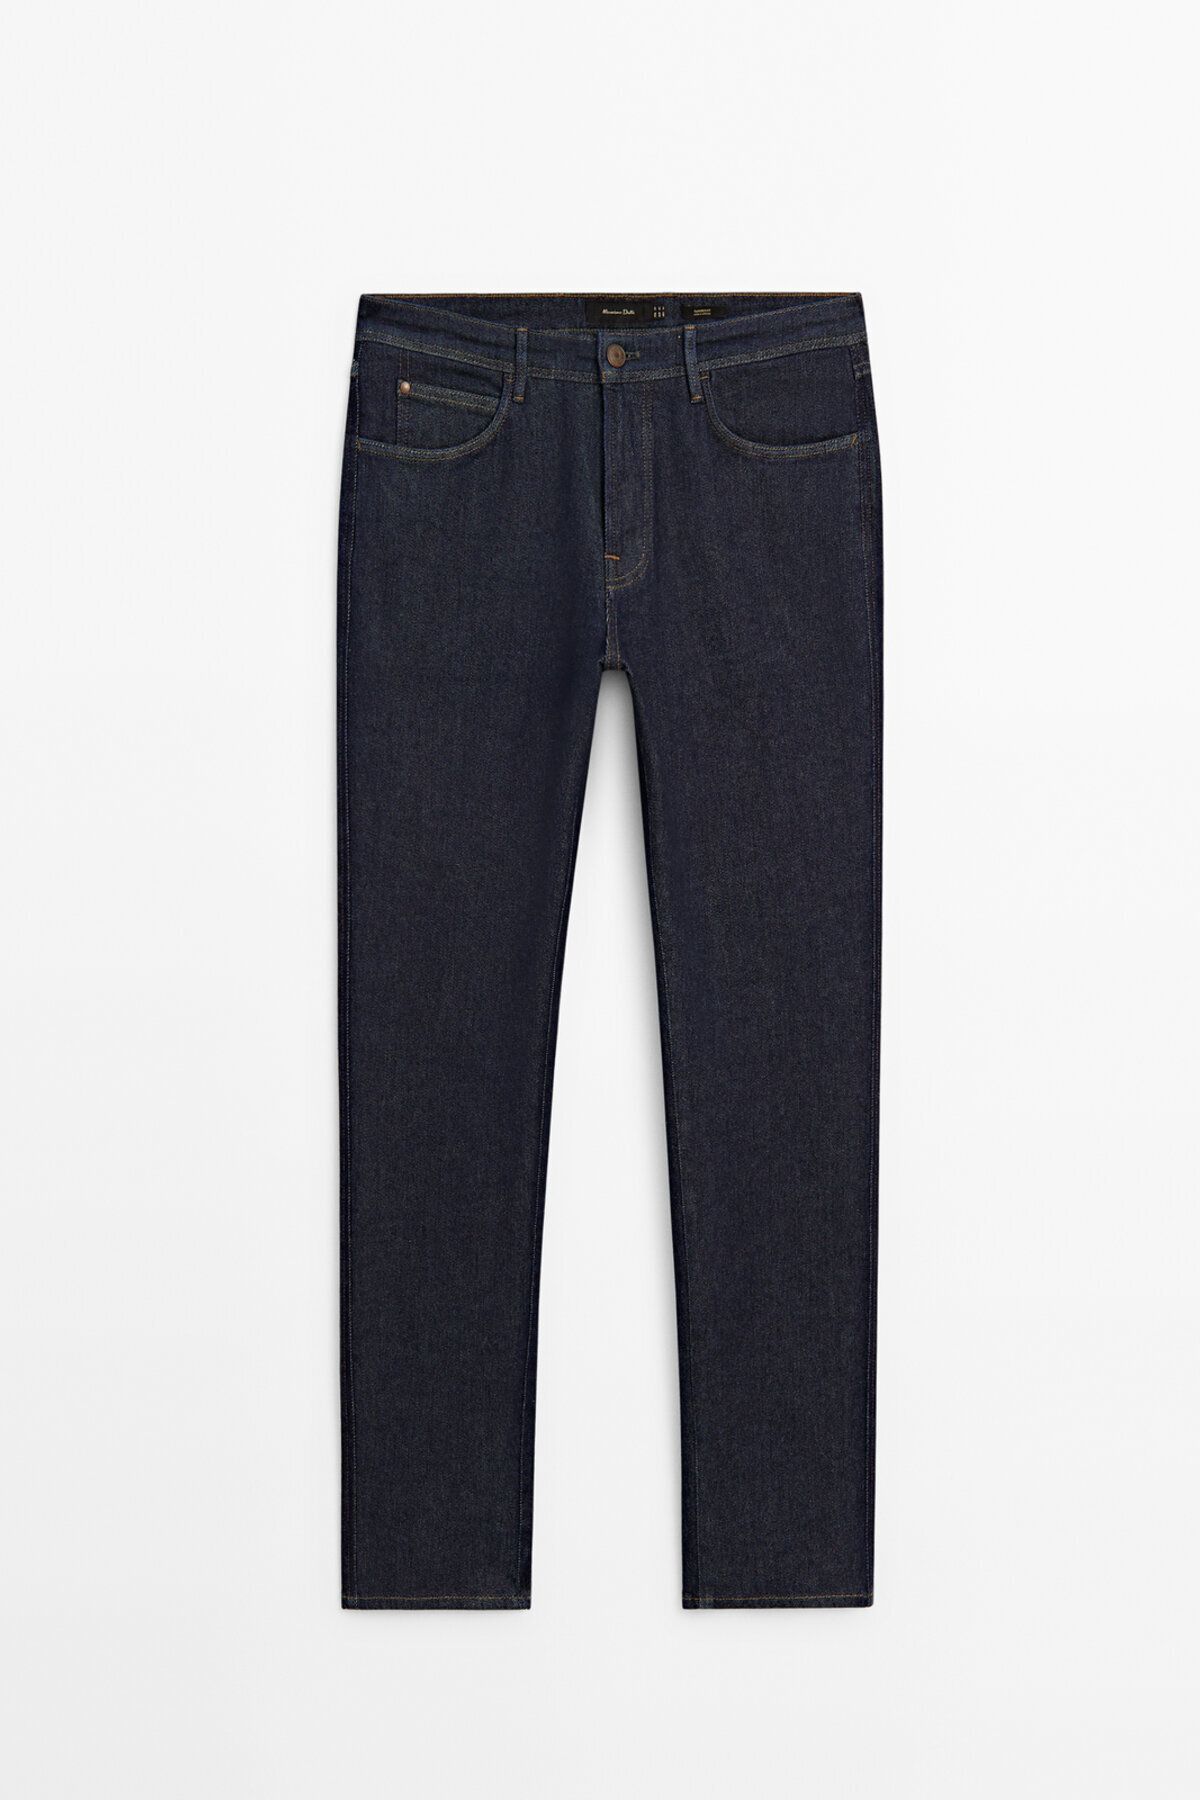 Massimo Dutti Tapered fit desized jean